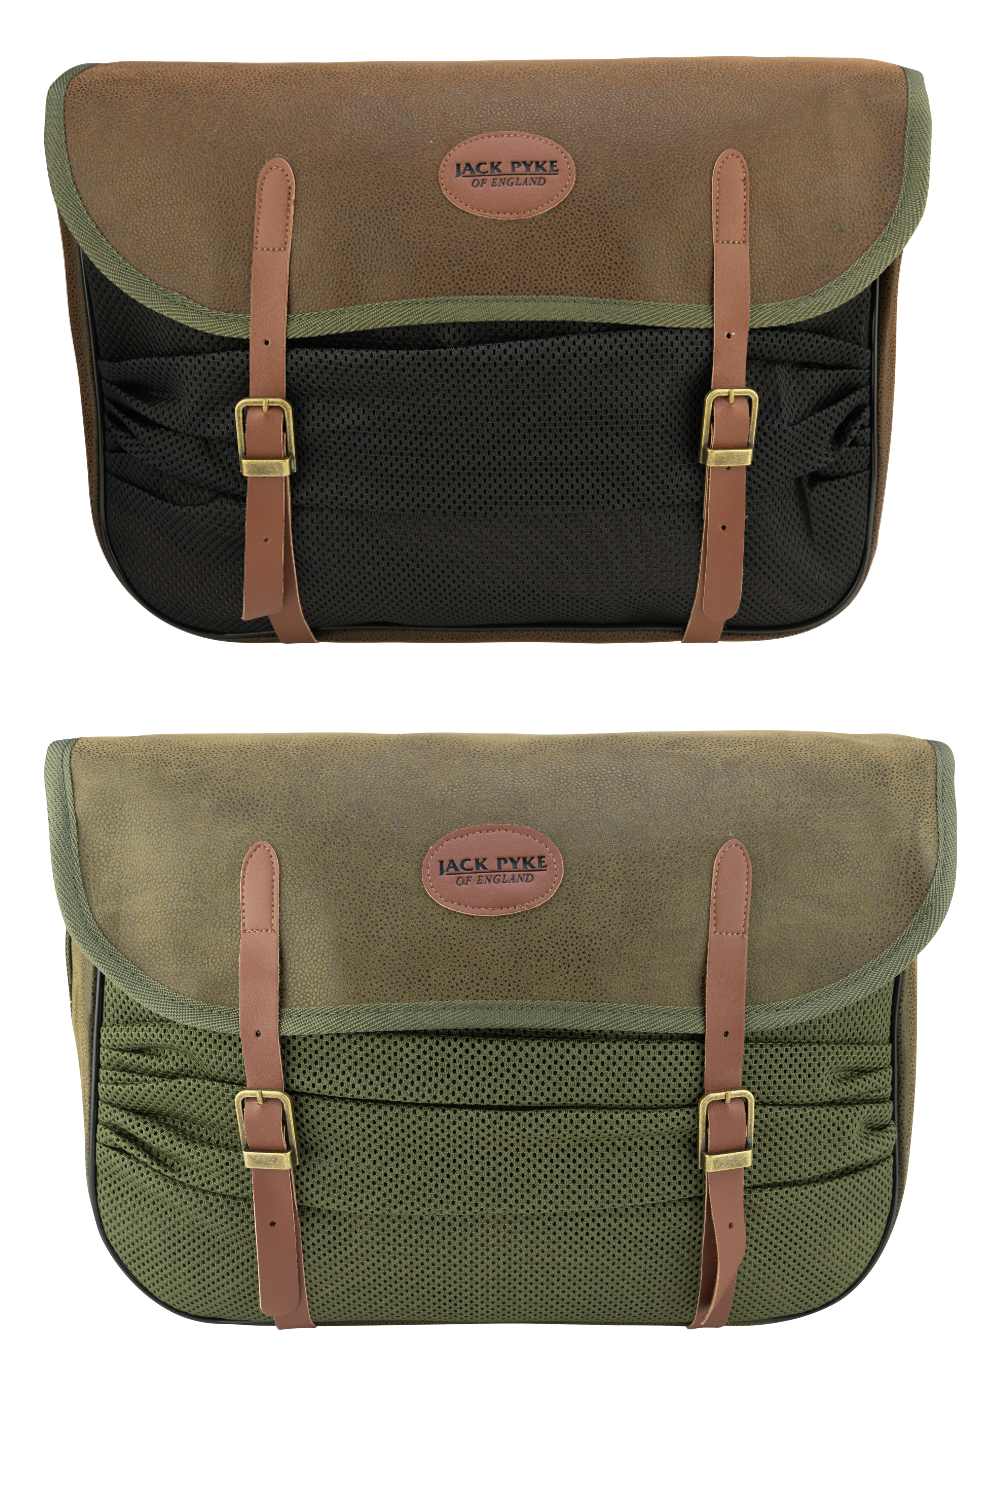 Jack Pyke Duotex Game Bag in Brown and Green 